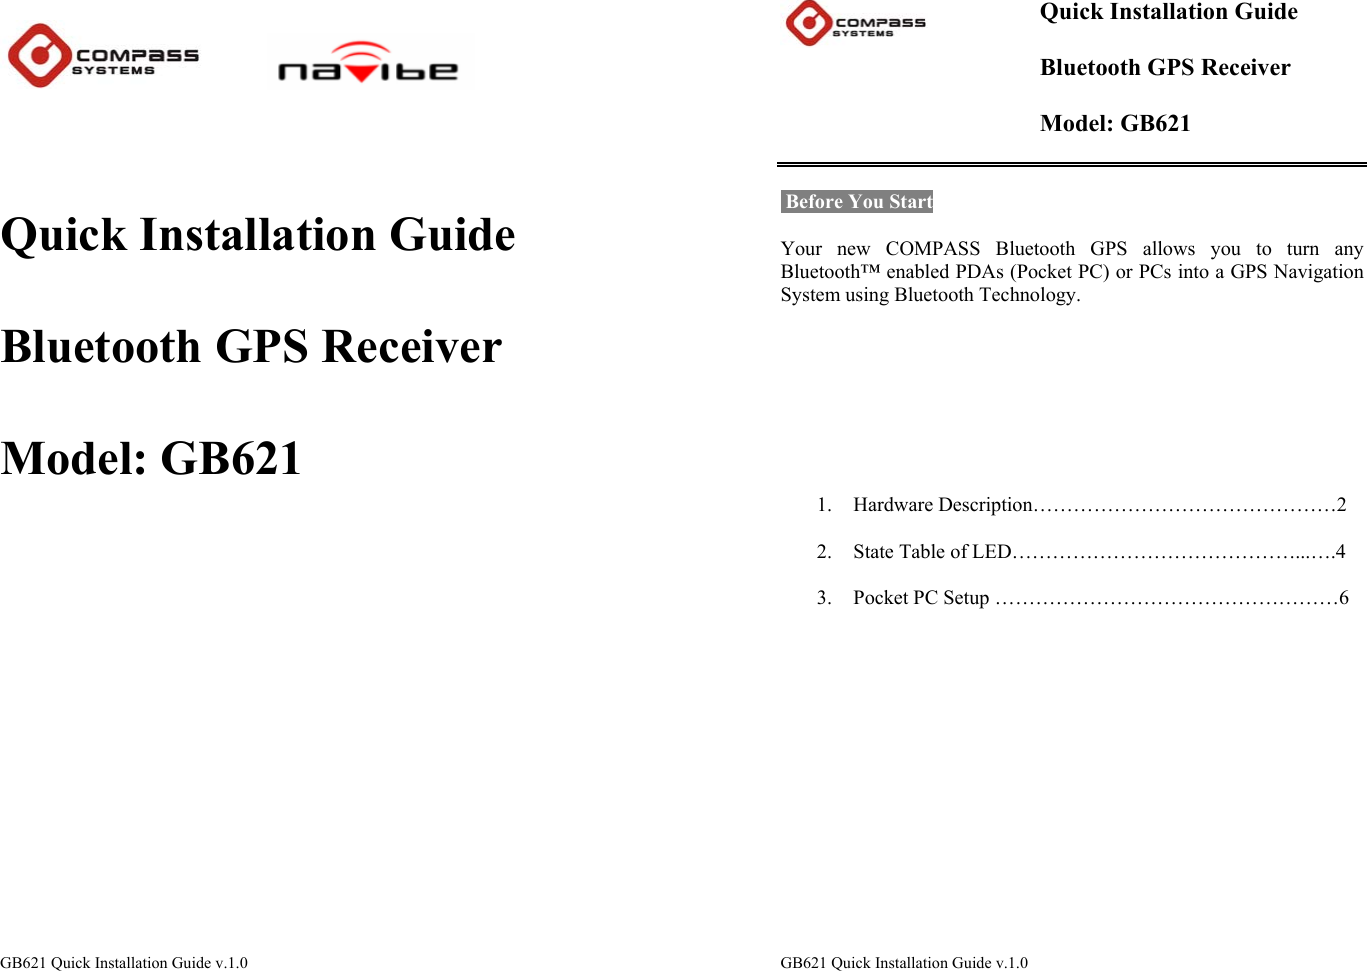 GB621 Quick Installation Guide v.1.0                                 Quick Installation Guide  Bluetooth GPS Receiver  Model: GB621                 GB621 Quick Installation Guide v.1.0    Quick Installation Guide  Bluetooth GPS Receiver  Model: GB621    Before You Start  Your new COMPASS Bluetooth GPS allows you to turn any Bluetooth™ enabled PDAs (Pocket PC) or PCs into a GPS Navigation System using Bluetooth Technology.           1. Hardware Description………………………………………2  2. State Table of LED……………………………………...….4  3. Pocket PC Setup ……………………………………………6           